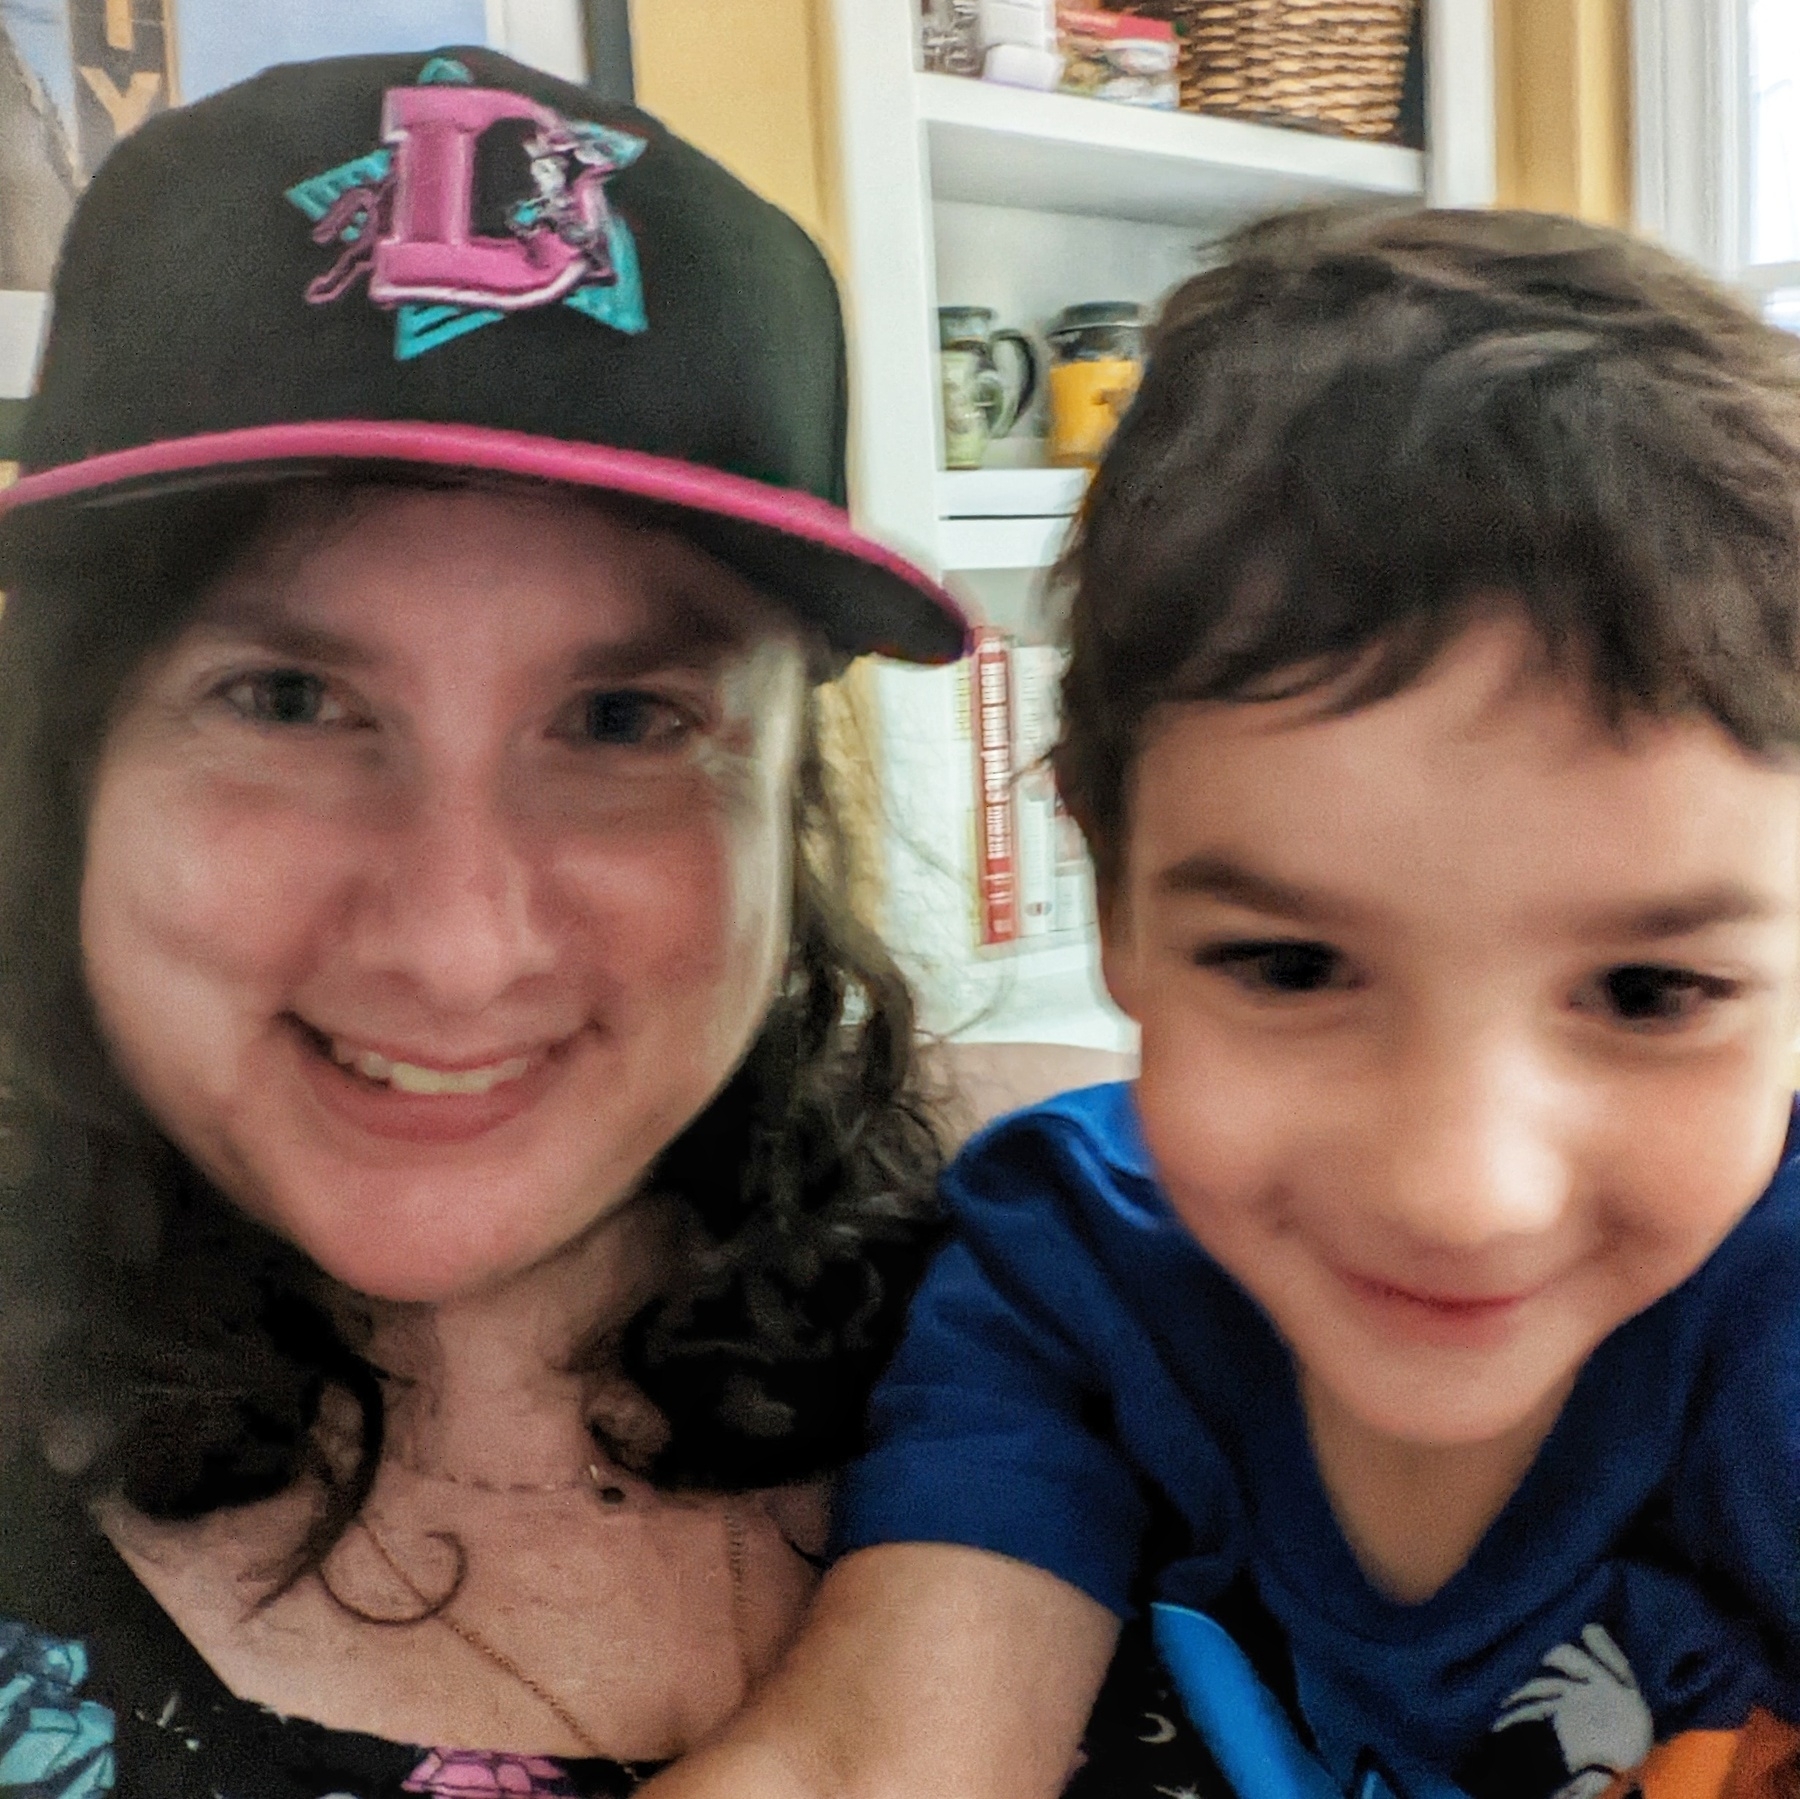 A white woman and a white child smile. They both have dark hair. The woman wears a black baseball cap with a pink brim and a logo with a bull jumping through a pink letter D, on the foreground of a turquoise star.